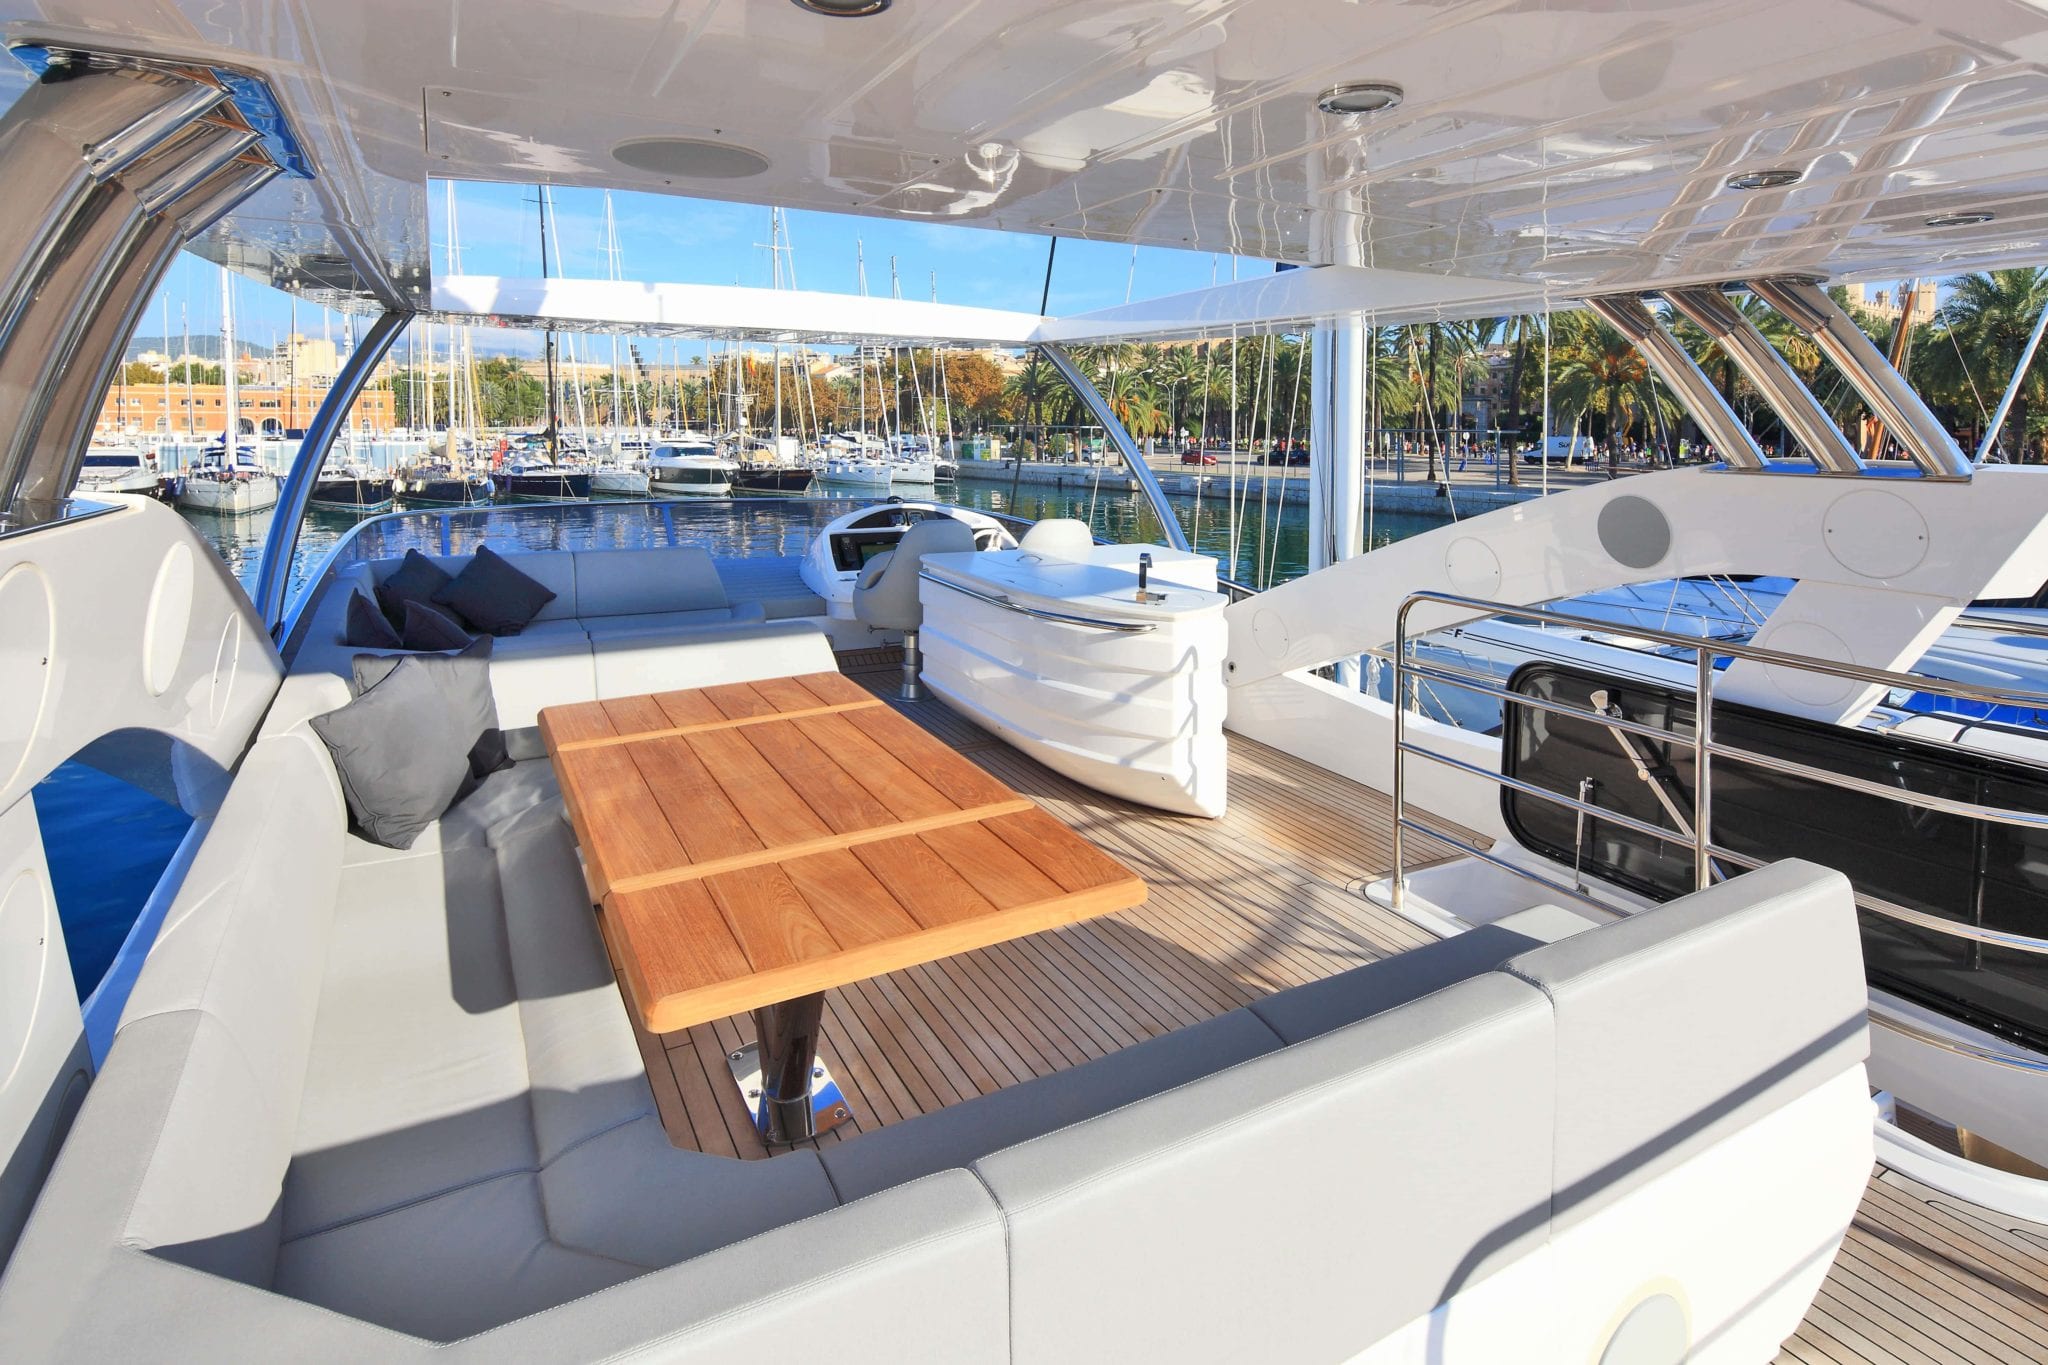 A closer look at the Flybridge onboard the Luxury Sunseekers yacht.